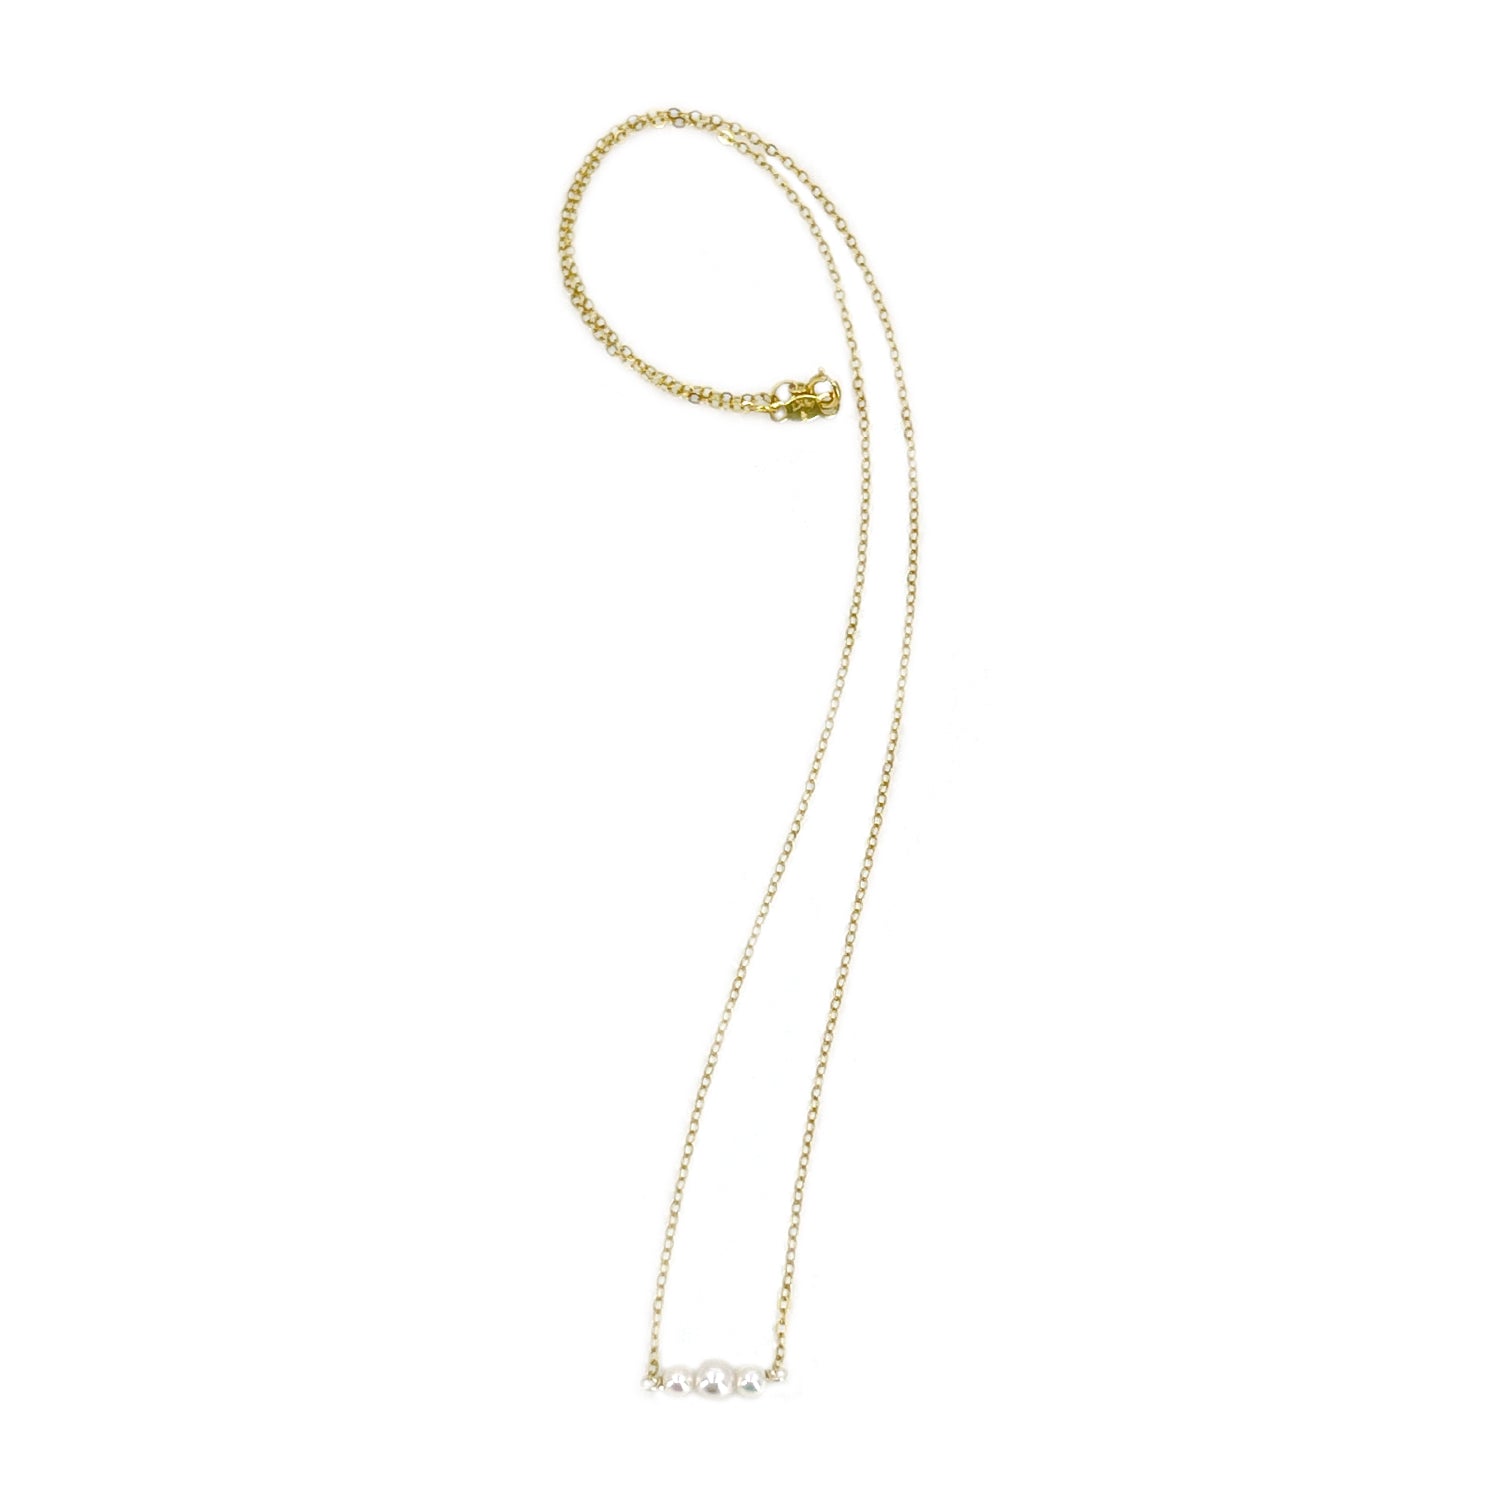 Modern Petite Graduated Akoya Saltwater Cultured Pearl Bar Necklace - 14K Yellow Gold